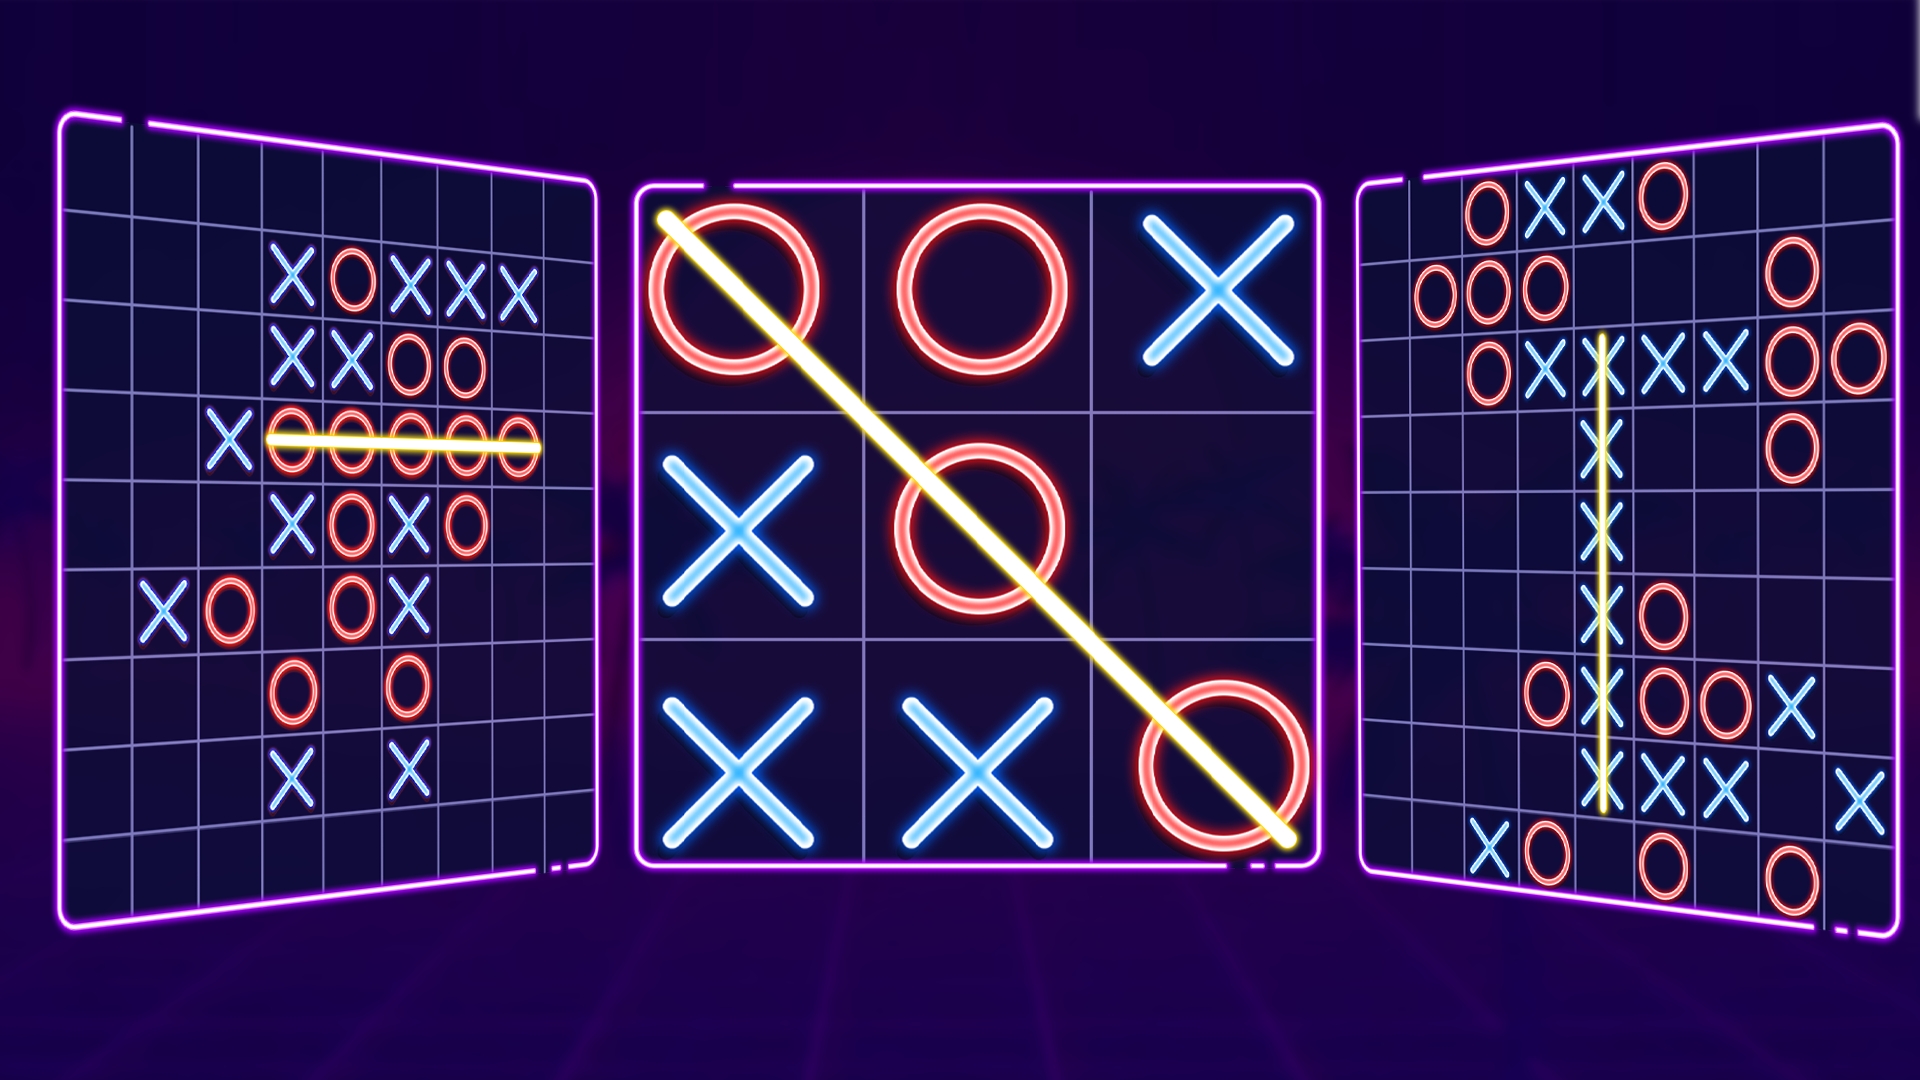 Tic Tac Toe Online puzzle xo APK for Android Download